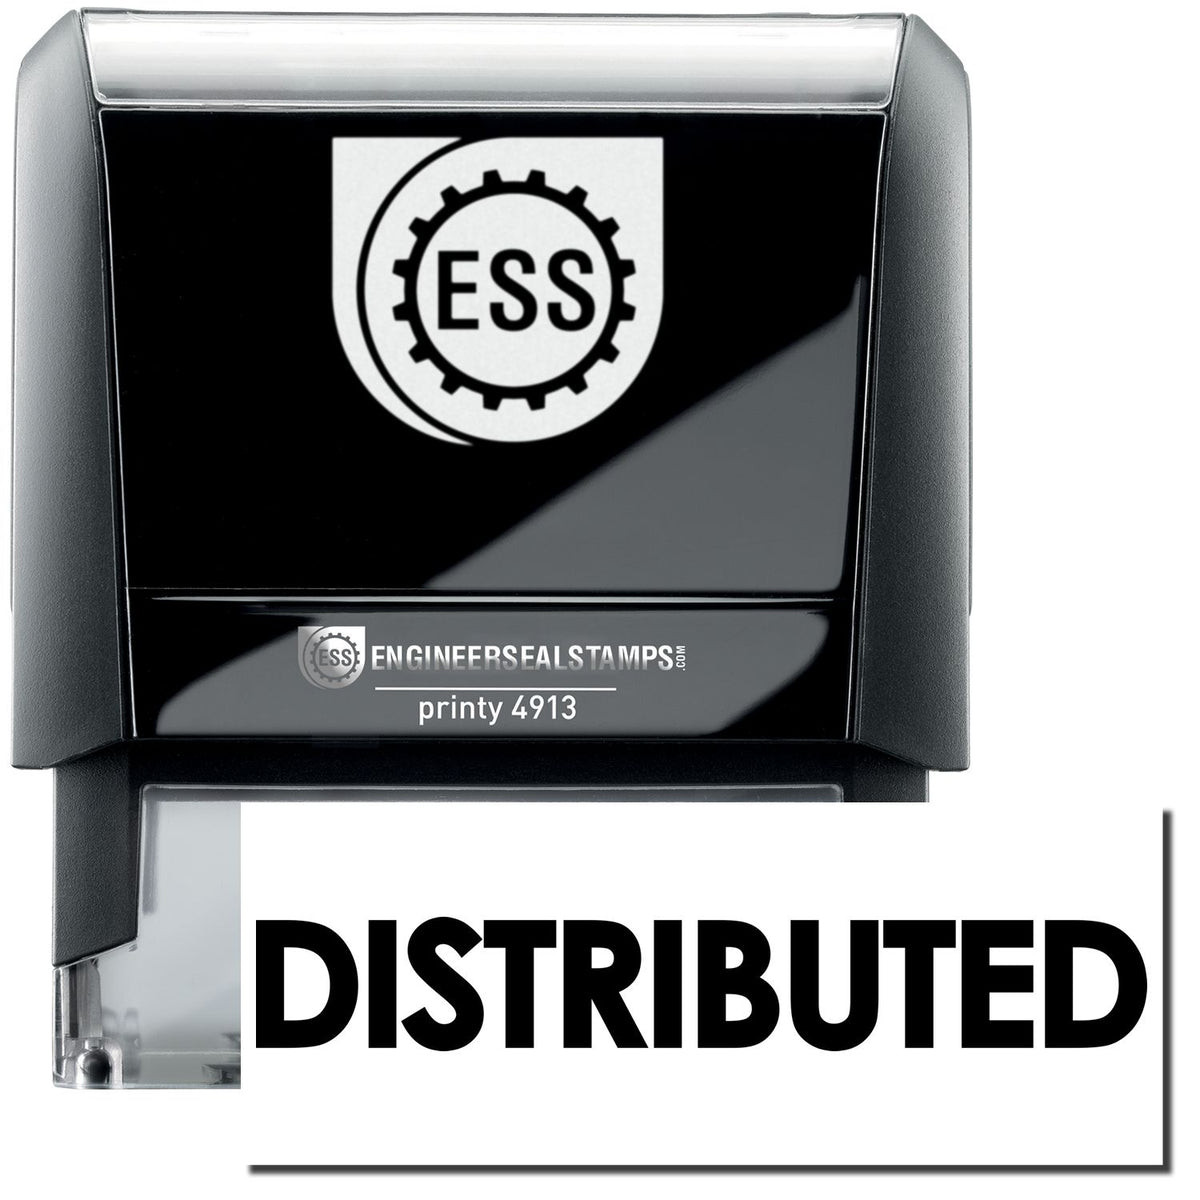 A self-inking stamp with a stamped image showing how the text &quot;DISTRIBUTED&quot; in large bold font is displayed by it after stamping.